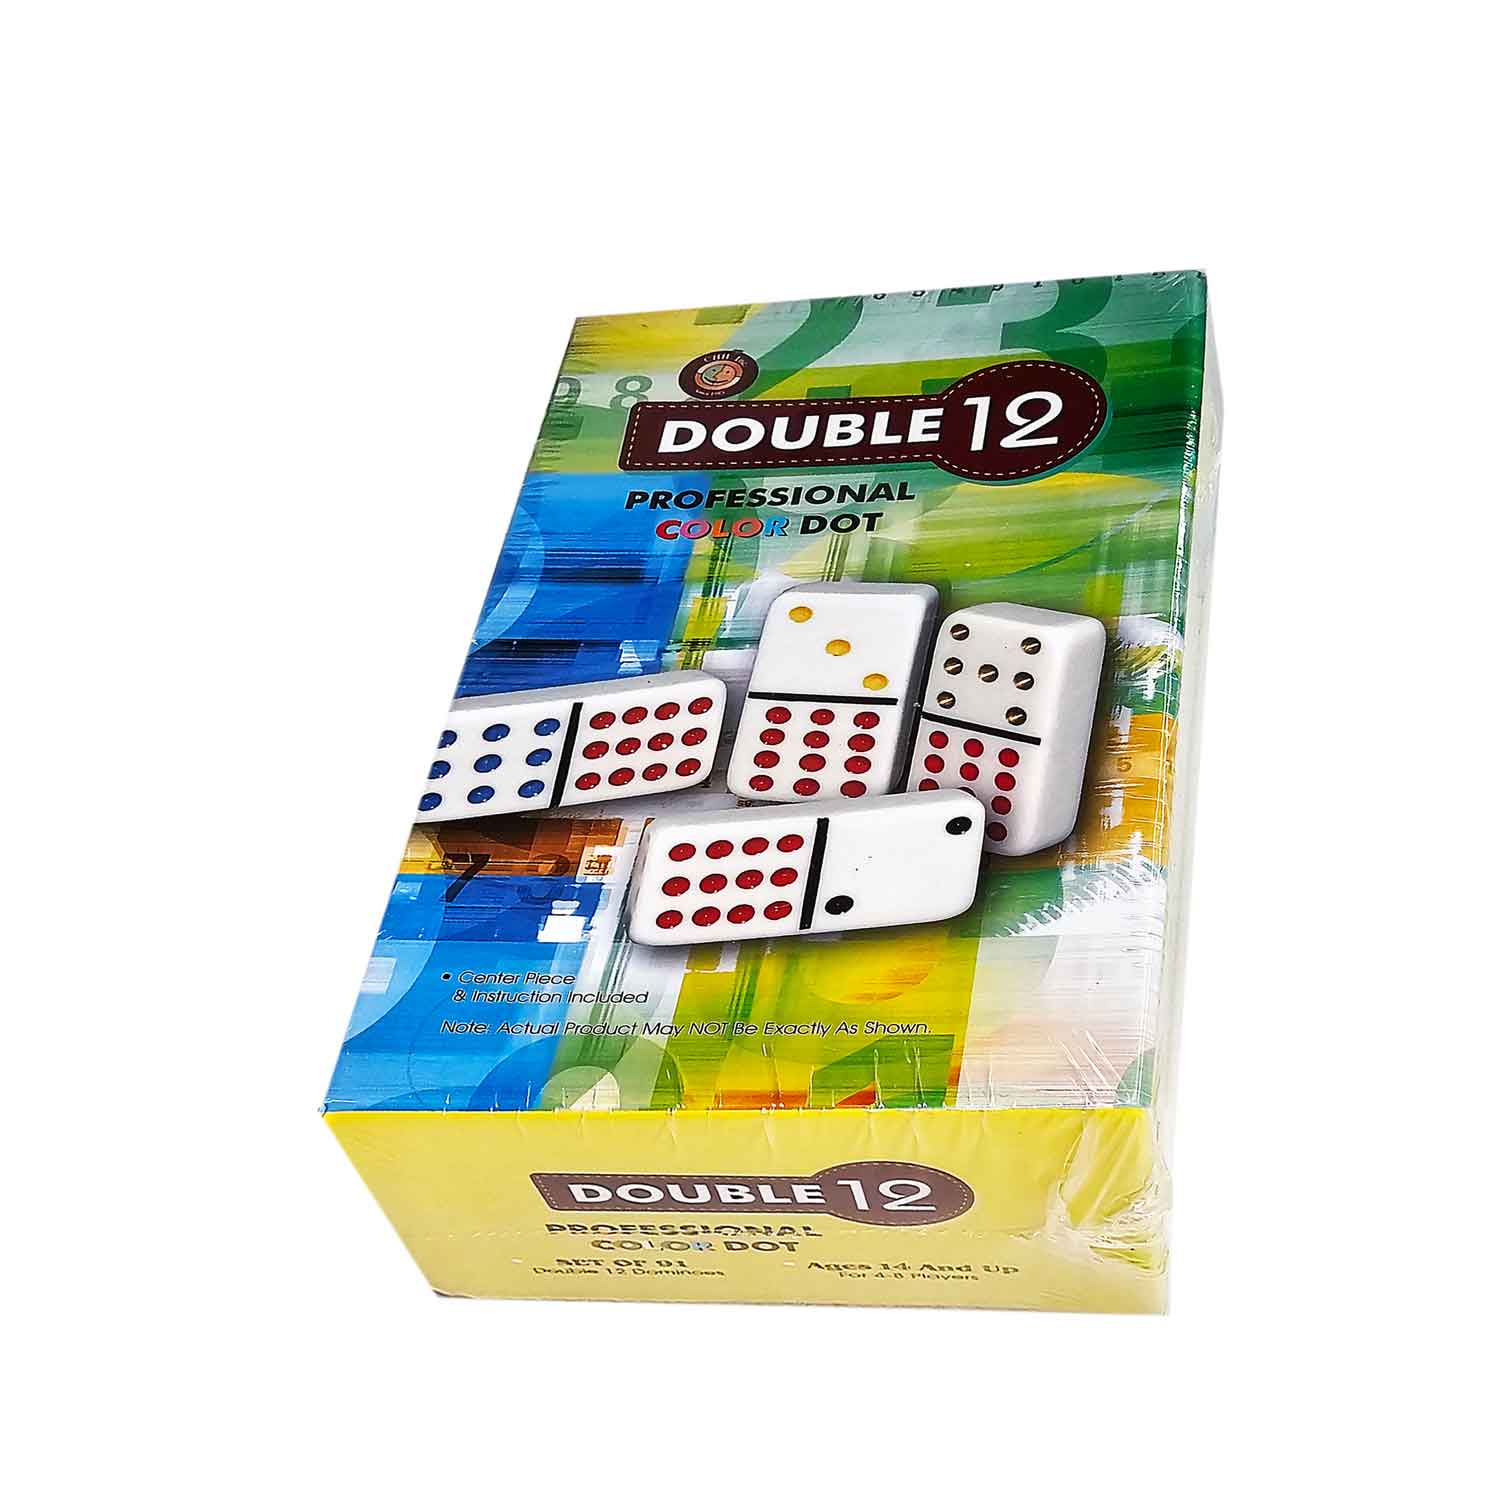 Double 12 Professional Color Dot Dominoes